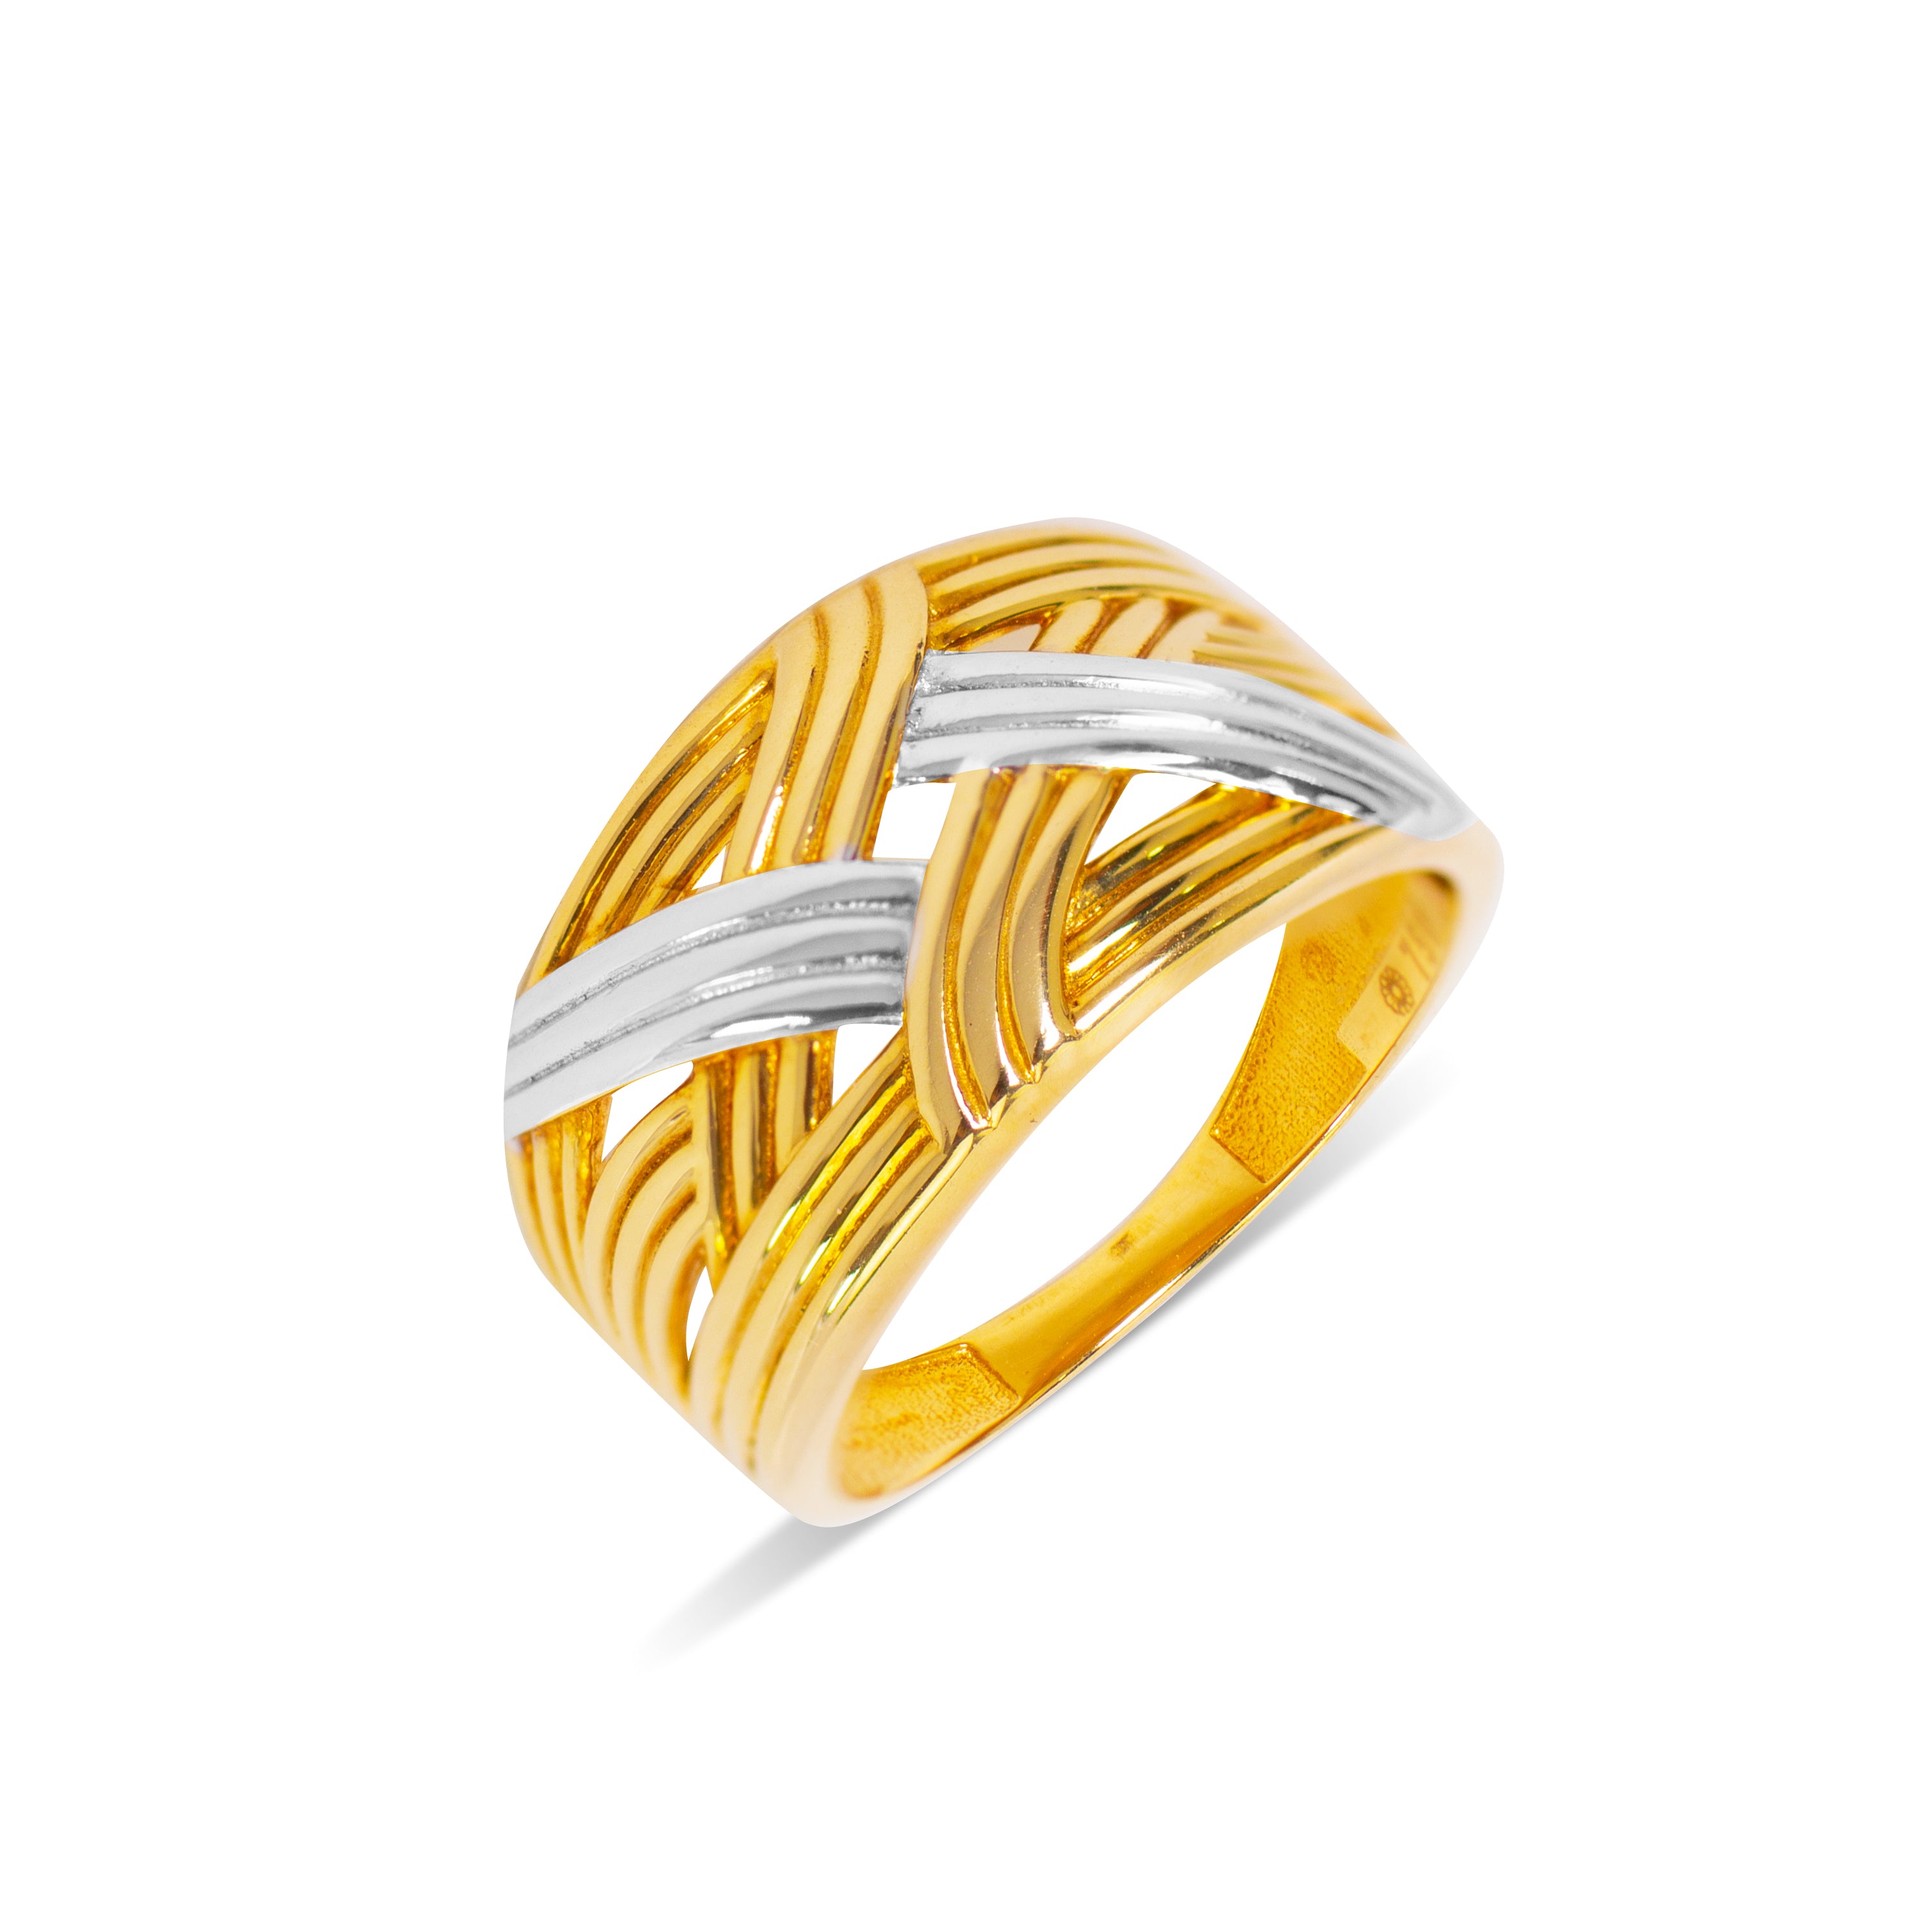 Buy quality Designer simple Plain Gold gents Ring in Ahmedabad